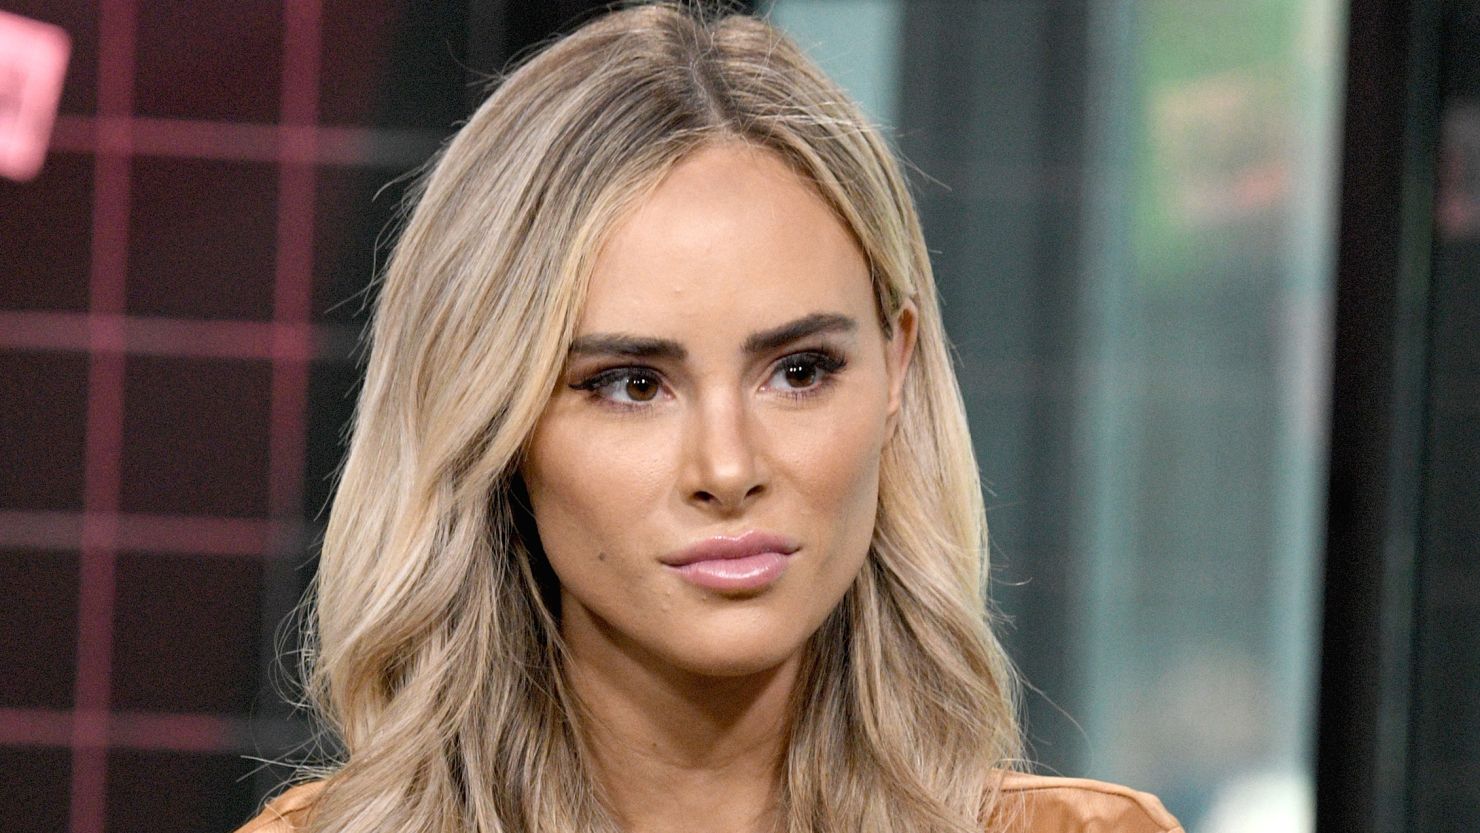 Amanda Stanton drove from her home in California to Arizona for a hair appointment.